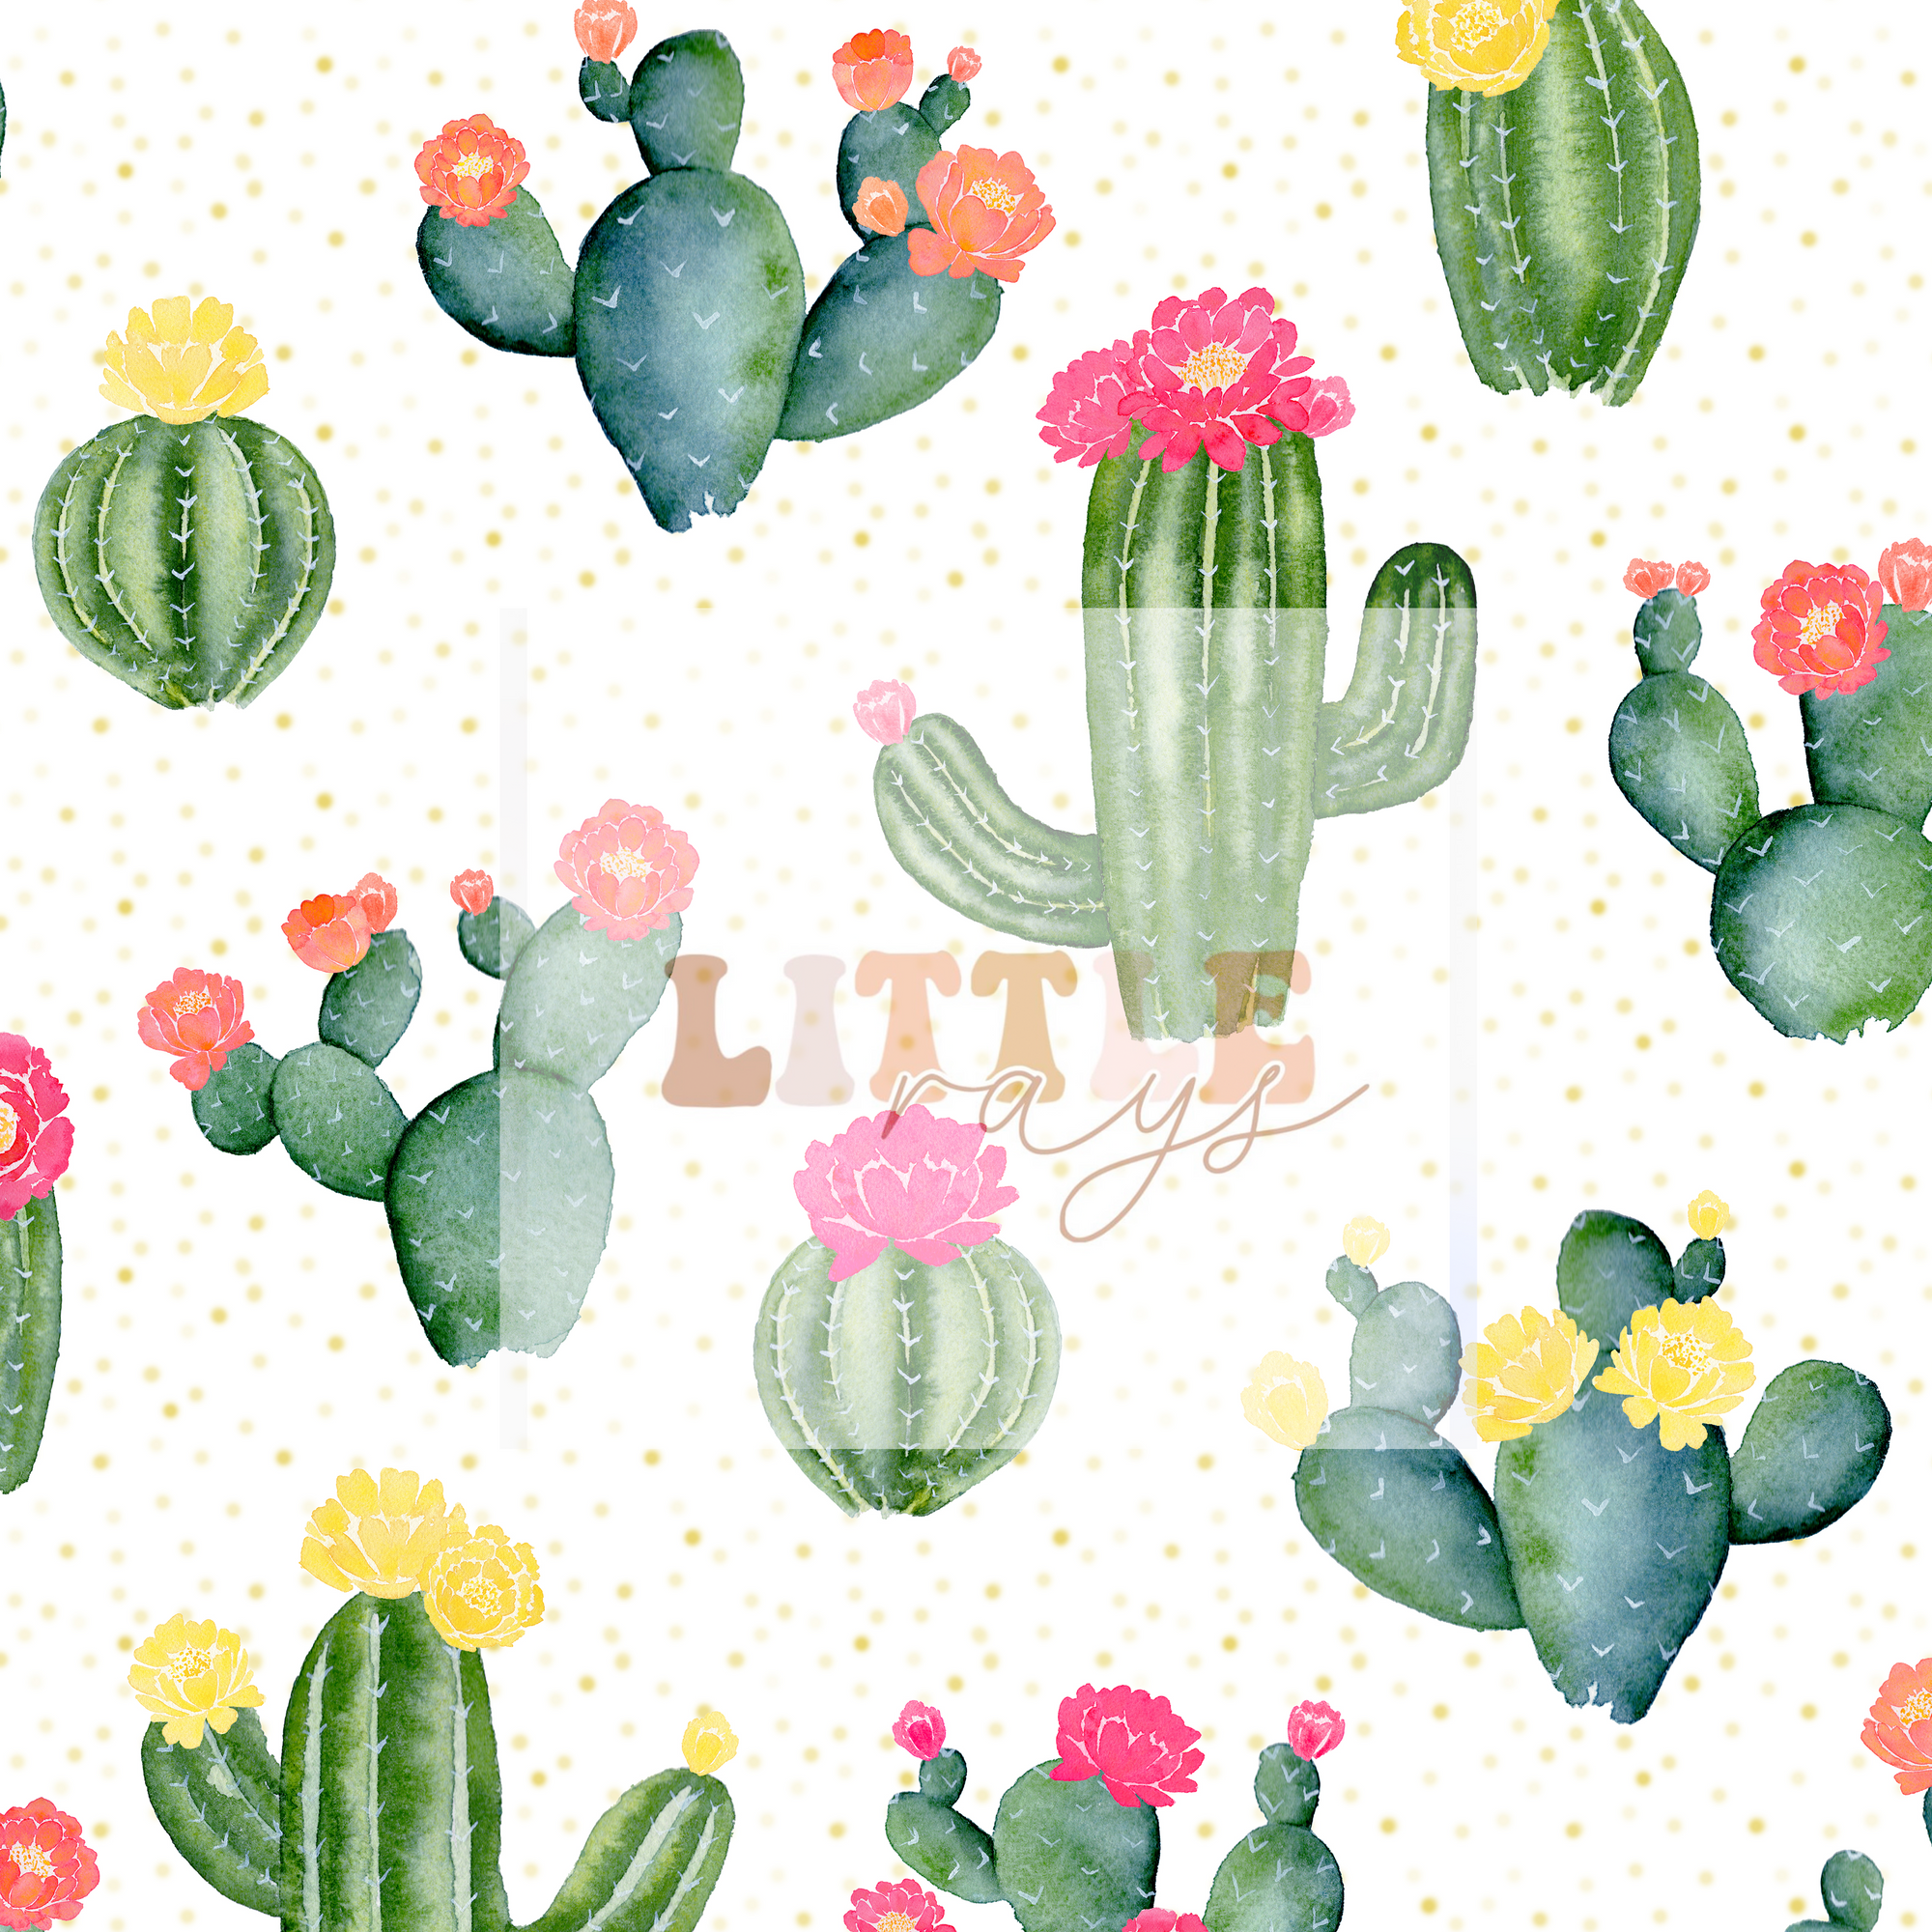 Flowering Cacti on dots